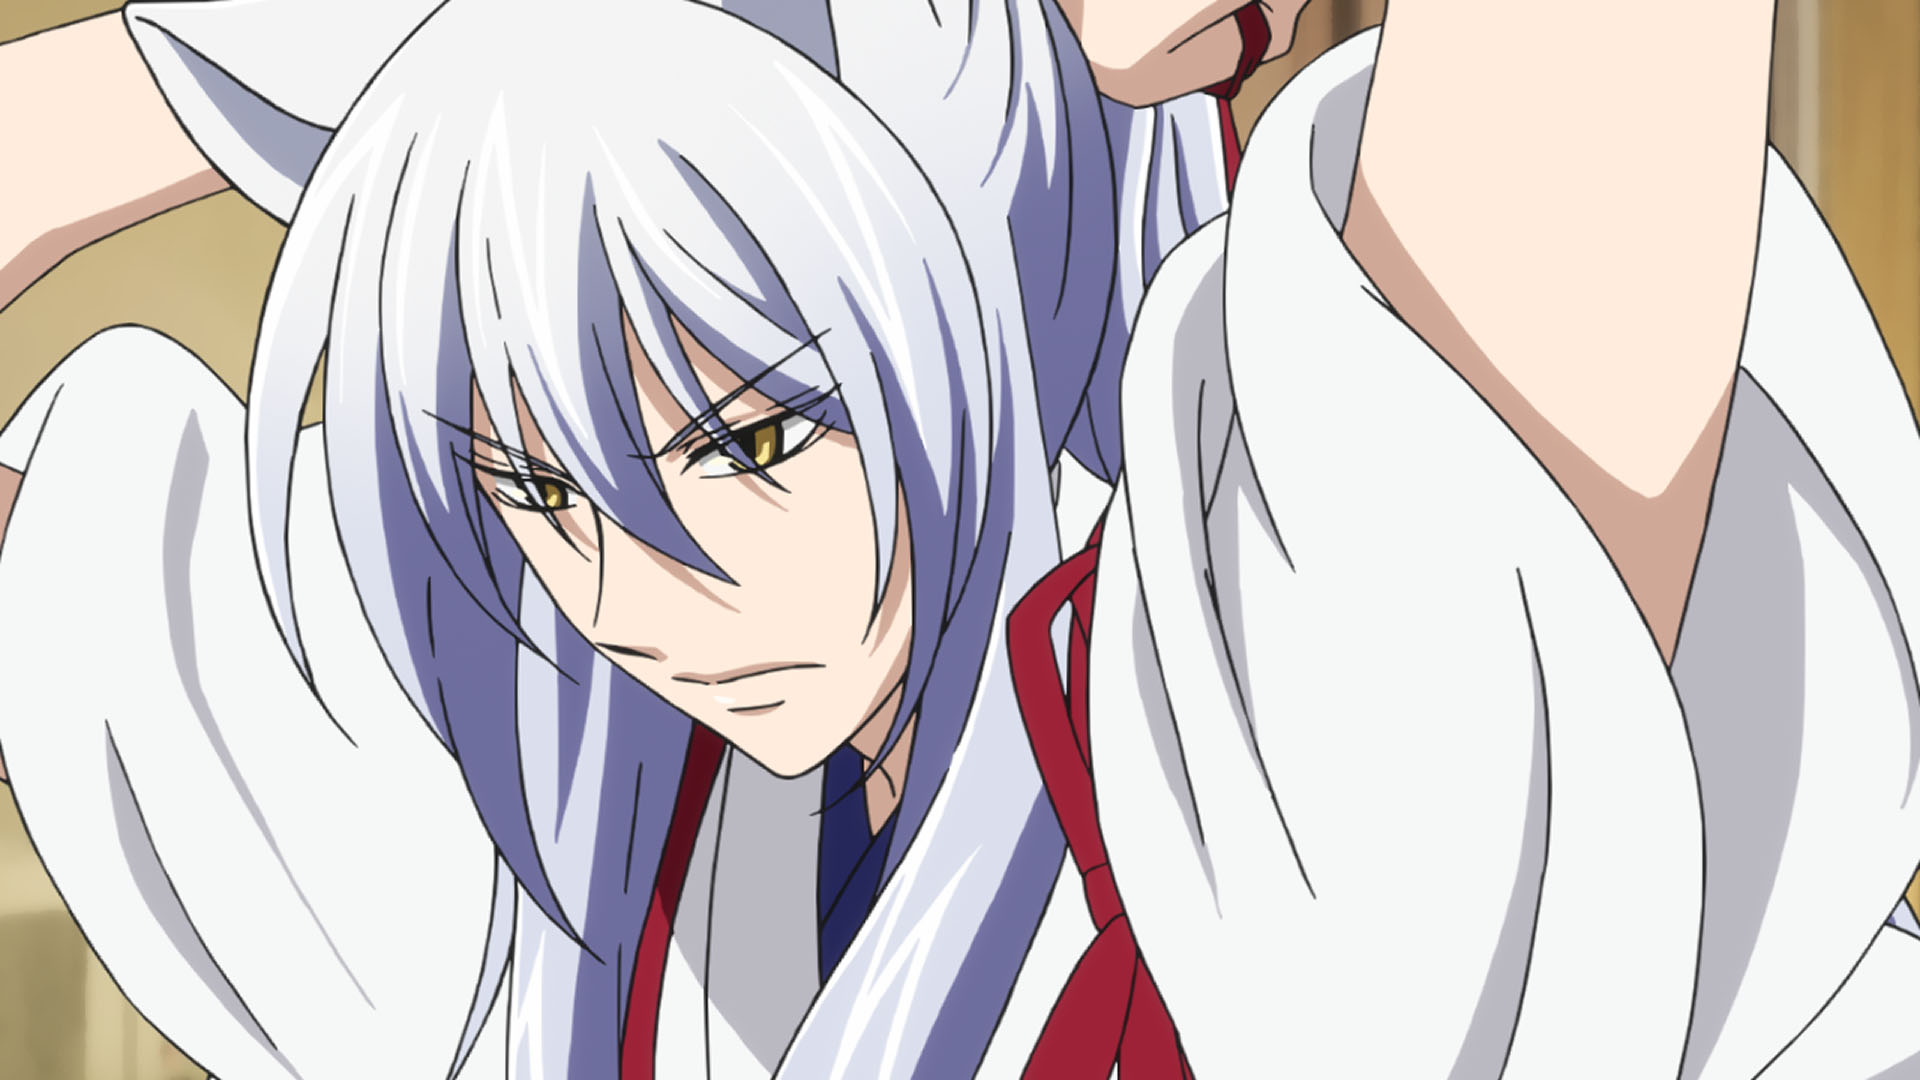 Daily White Haired Charas on X: The white haired boy of the day